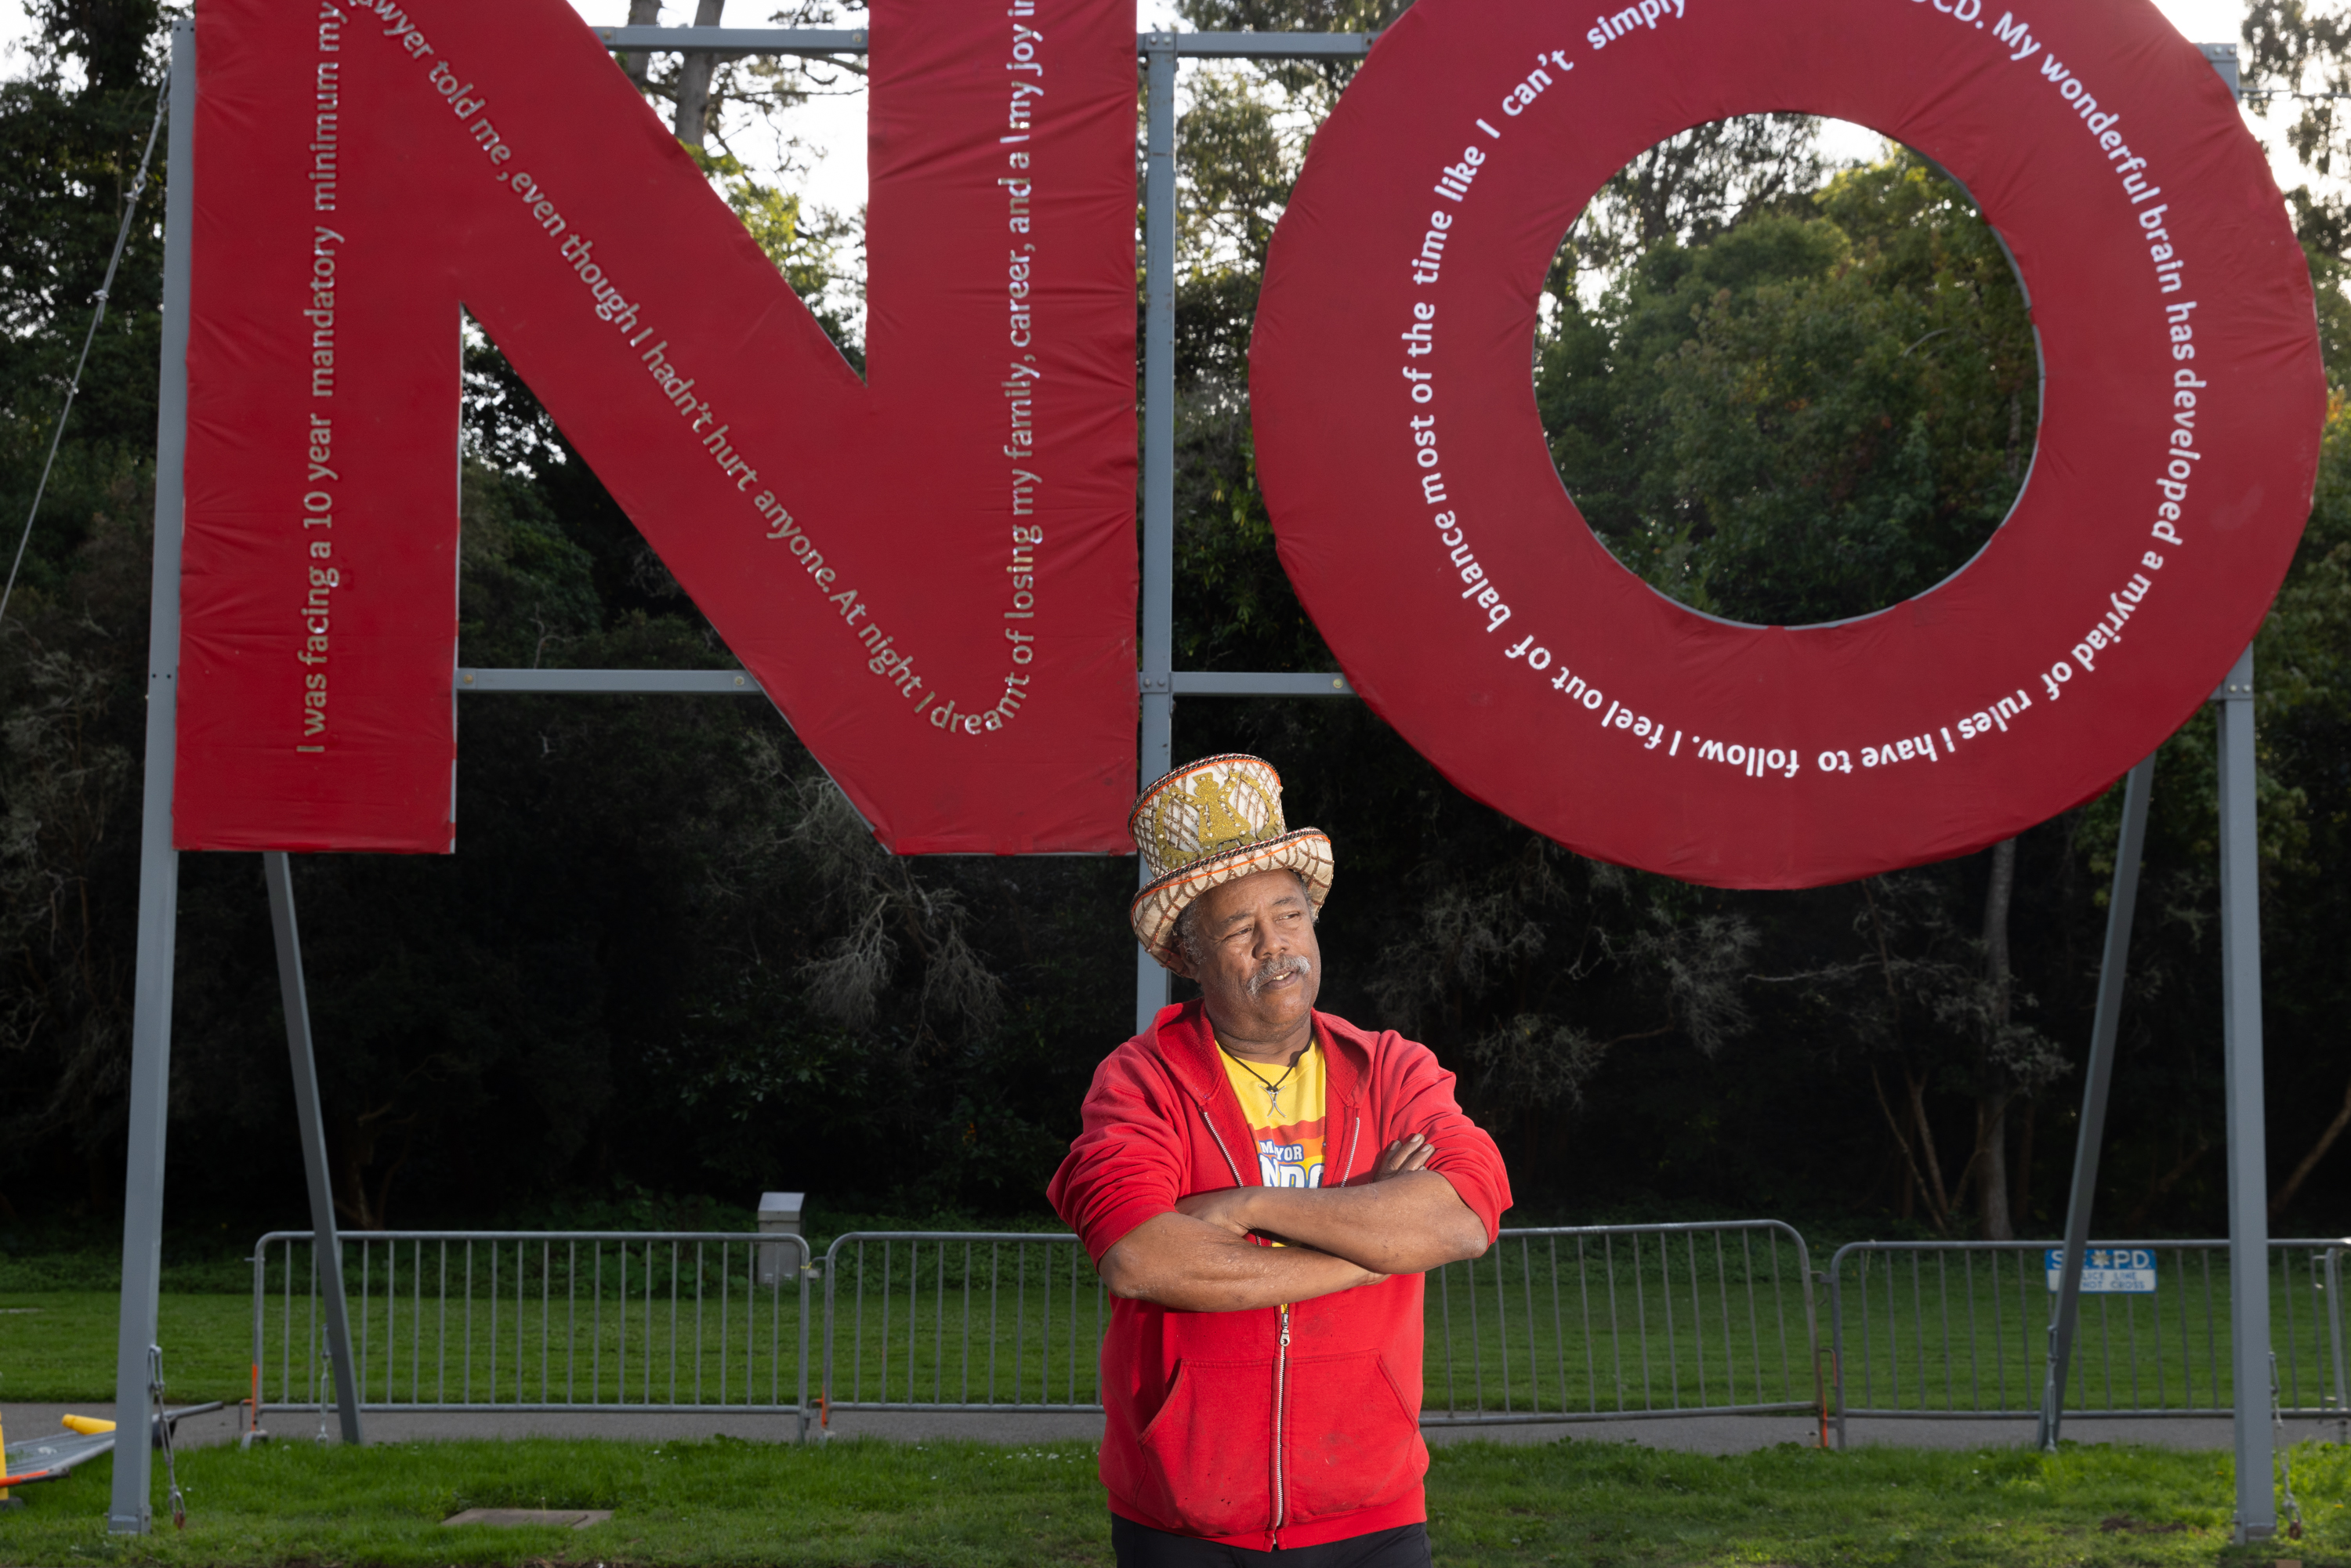 A person with a top hat and red sweater stands with a "No Dancing" sign in the back.